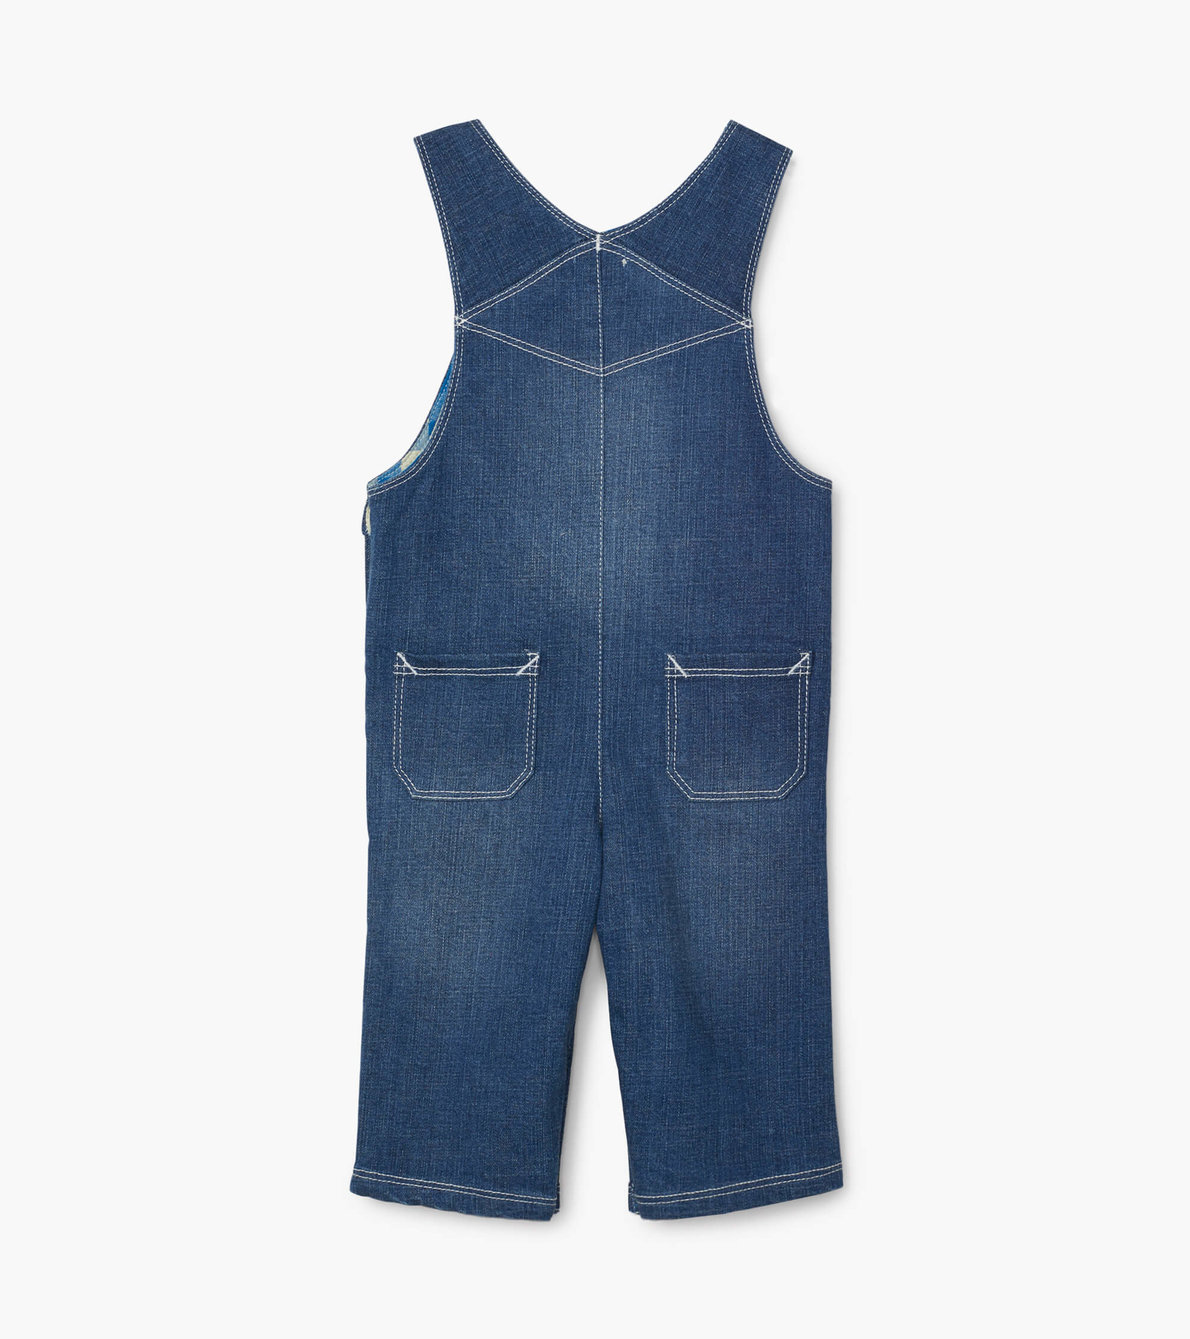 View larger image of Denim Baby Overalls